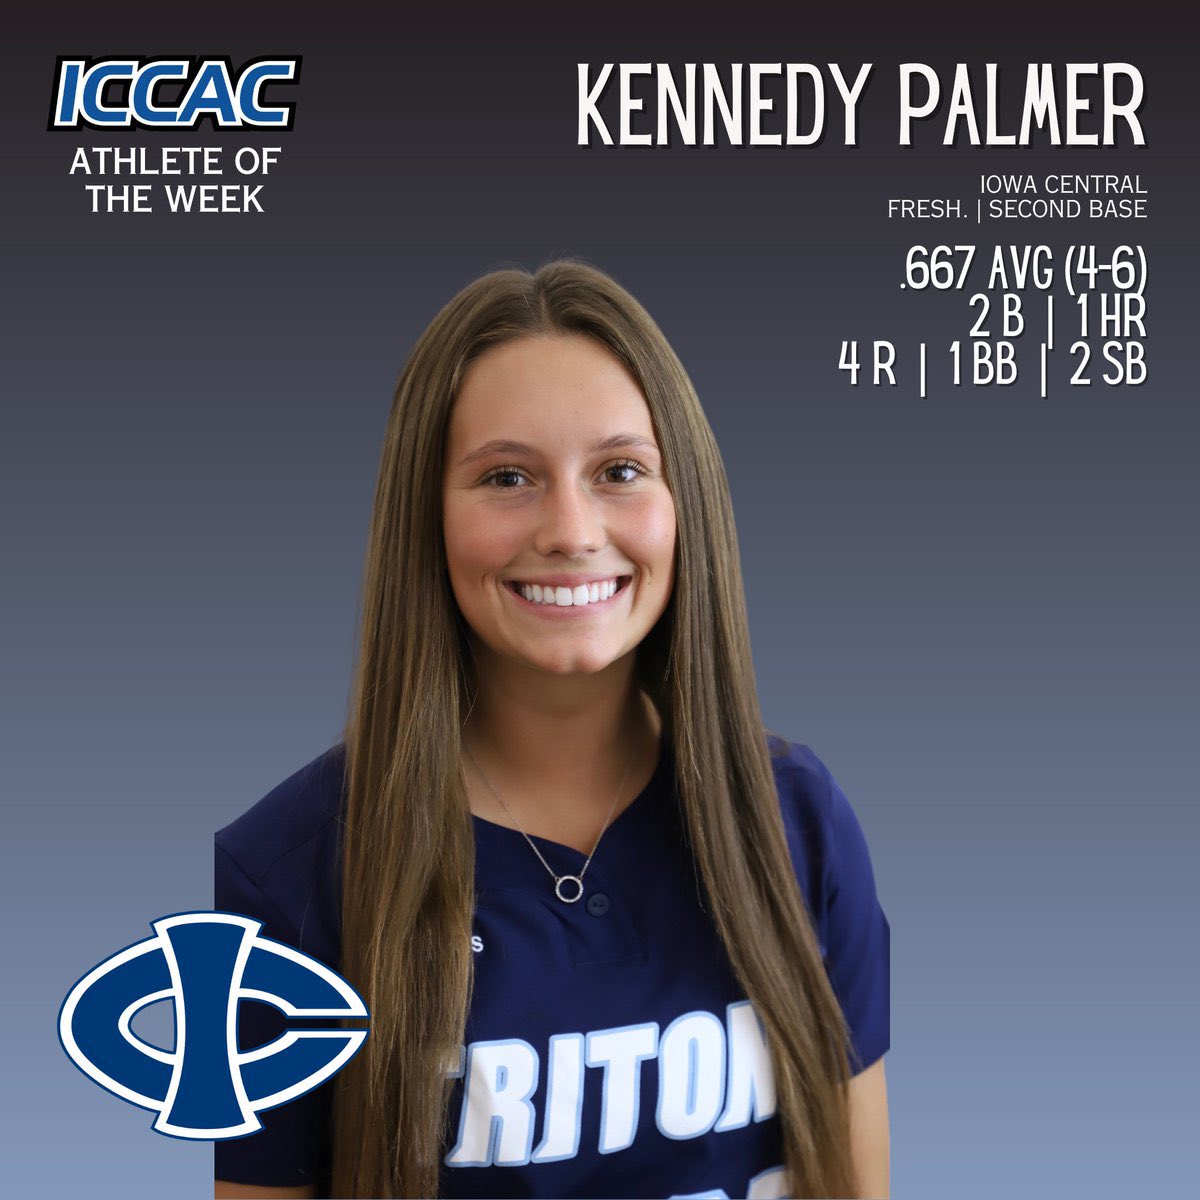 Congratulations 𝑲𝒆𝒏𝒏𝒆𝒅𝒚 𝑷𝒂𝒍𝒎𝒆𝒓, ICCAC PLAYER OF THE WEEK! #Tritonpride #tritonexcellence